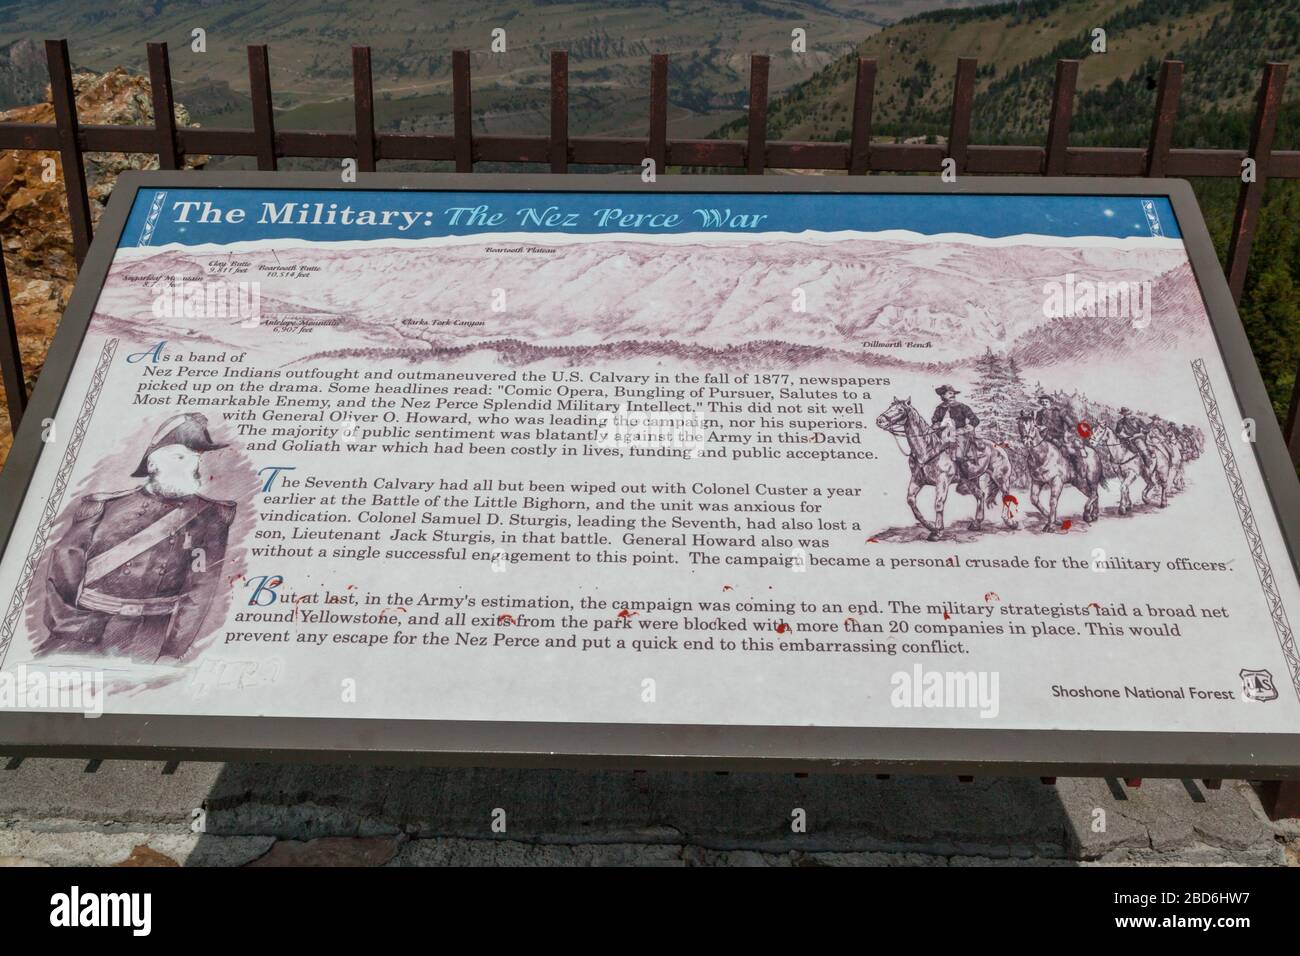 Dead Indian Pass, Wyoming / USA - July 14, 2014:  A metal sign explaining the Nez Perce War displayed at the summit of Dead Indian Pass in Wyoming. Stock Photo